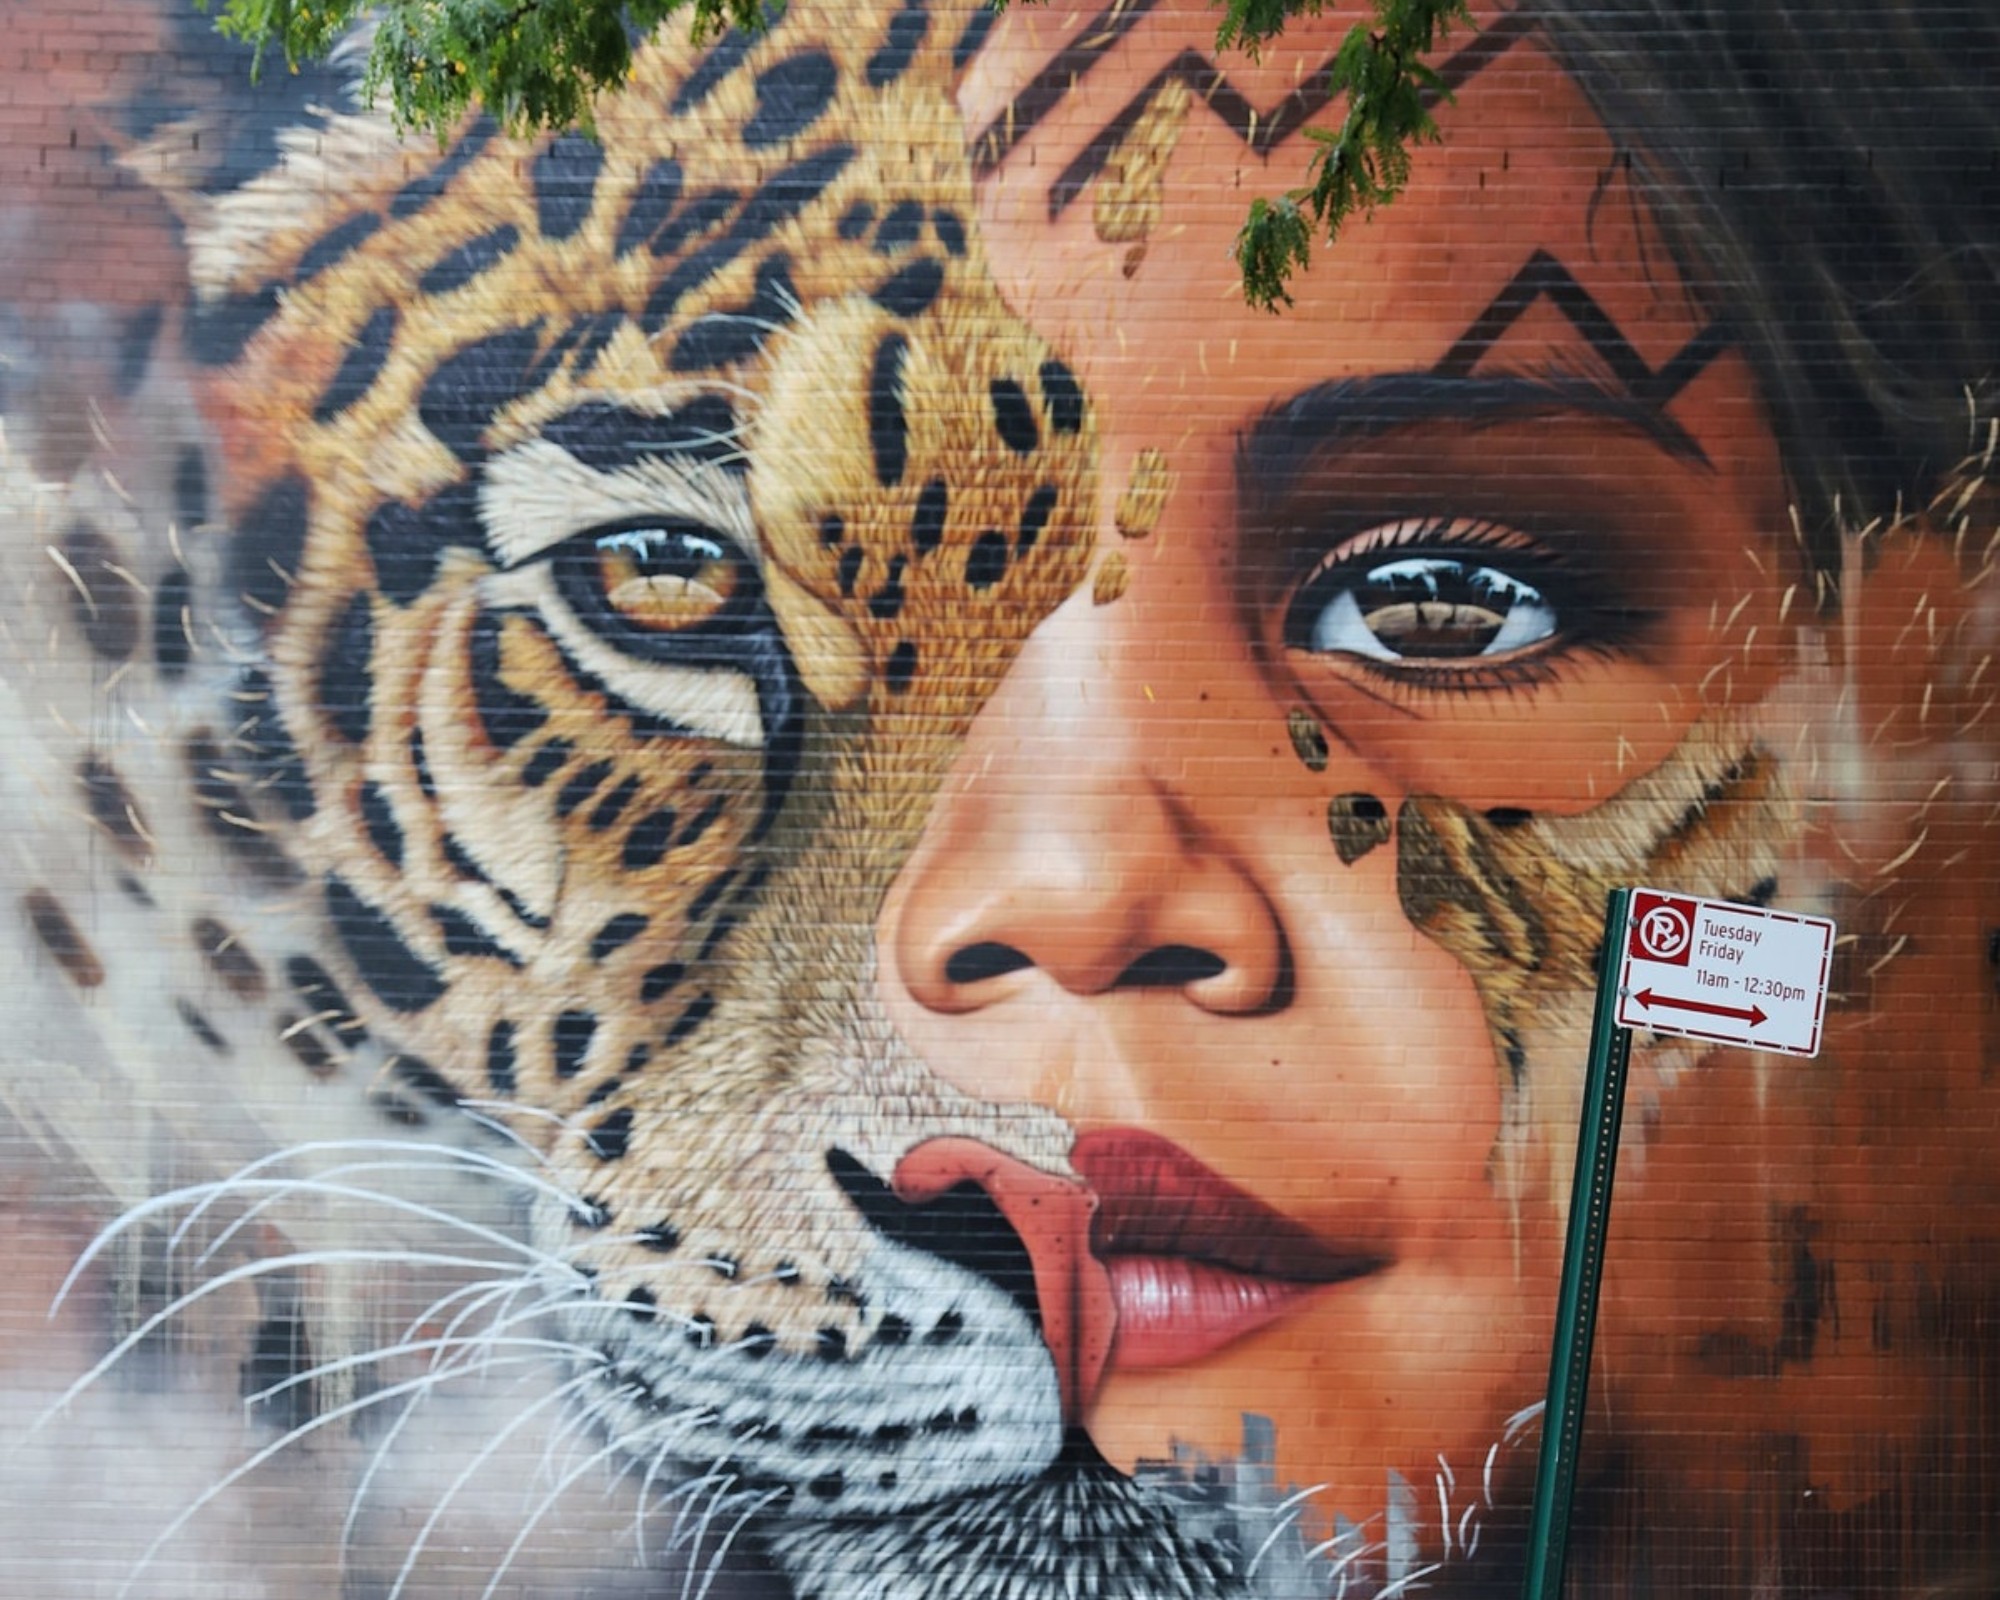 Close up of Sonny Street Art Mural of Amazonian Girl and Jaguar Face Painted in Williamsburg, Brooklyn New York as part of Climate Week 2018 in partnership with UNICEF and Greenpoint Innovations